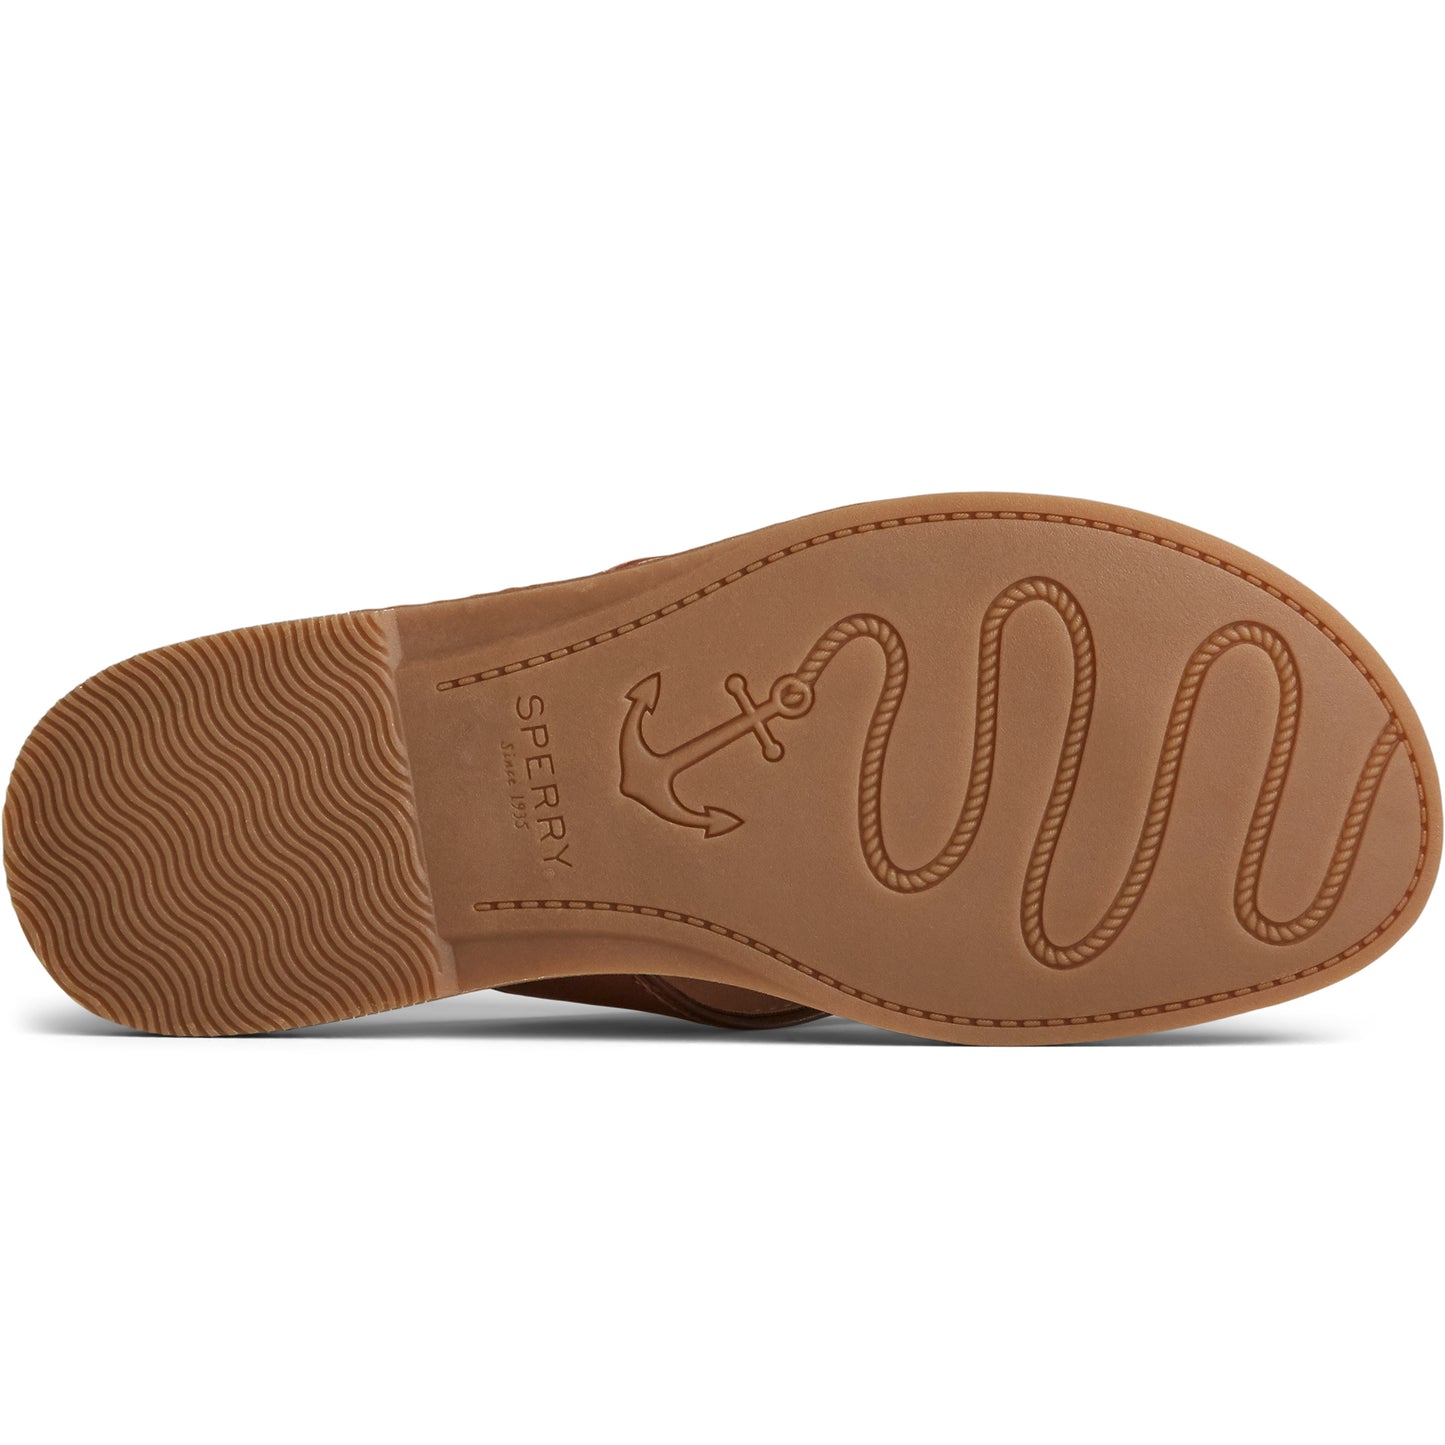 Sperry Women's Waypoint Thong - Tan (STS850450)